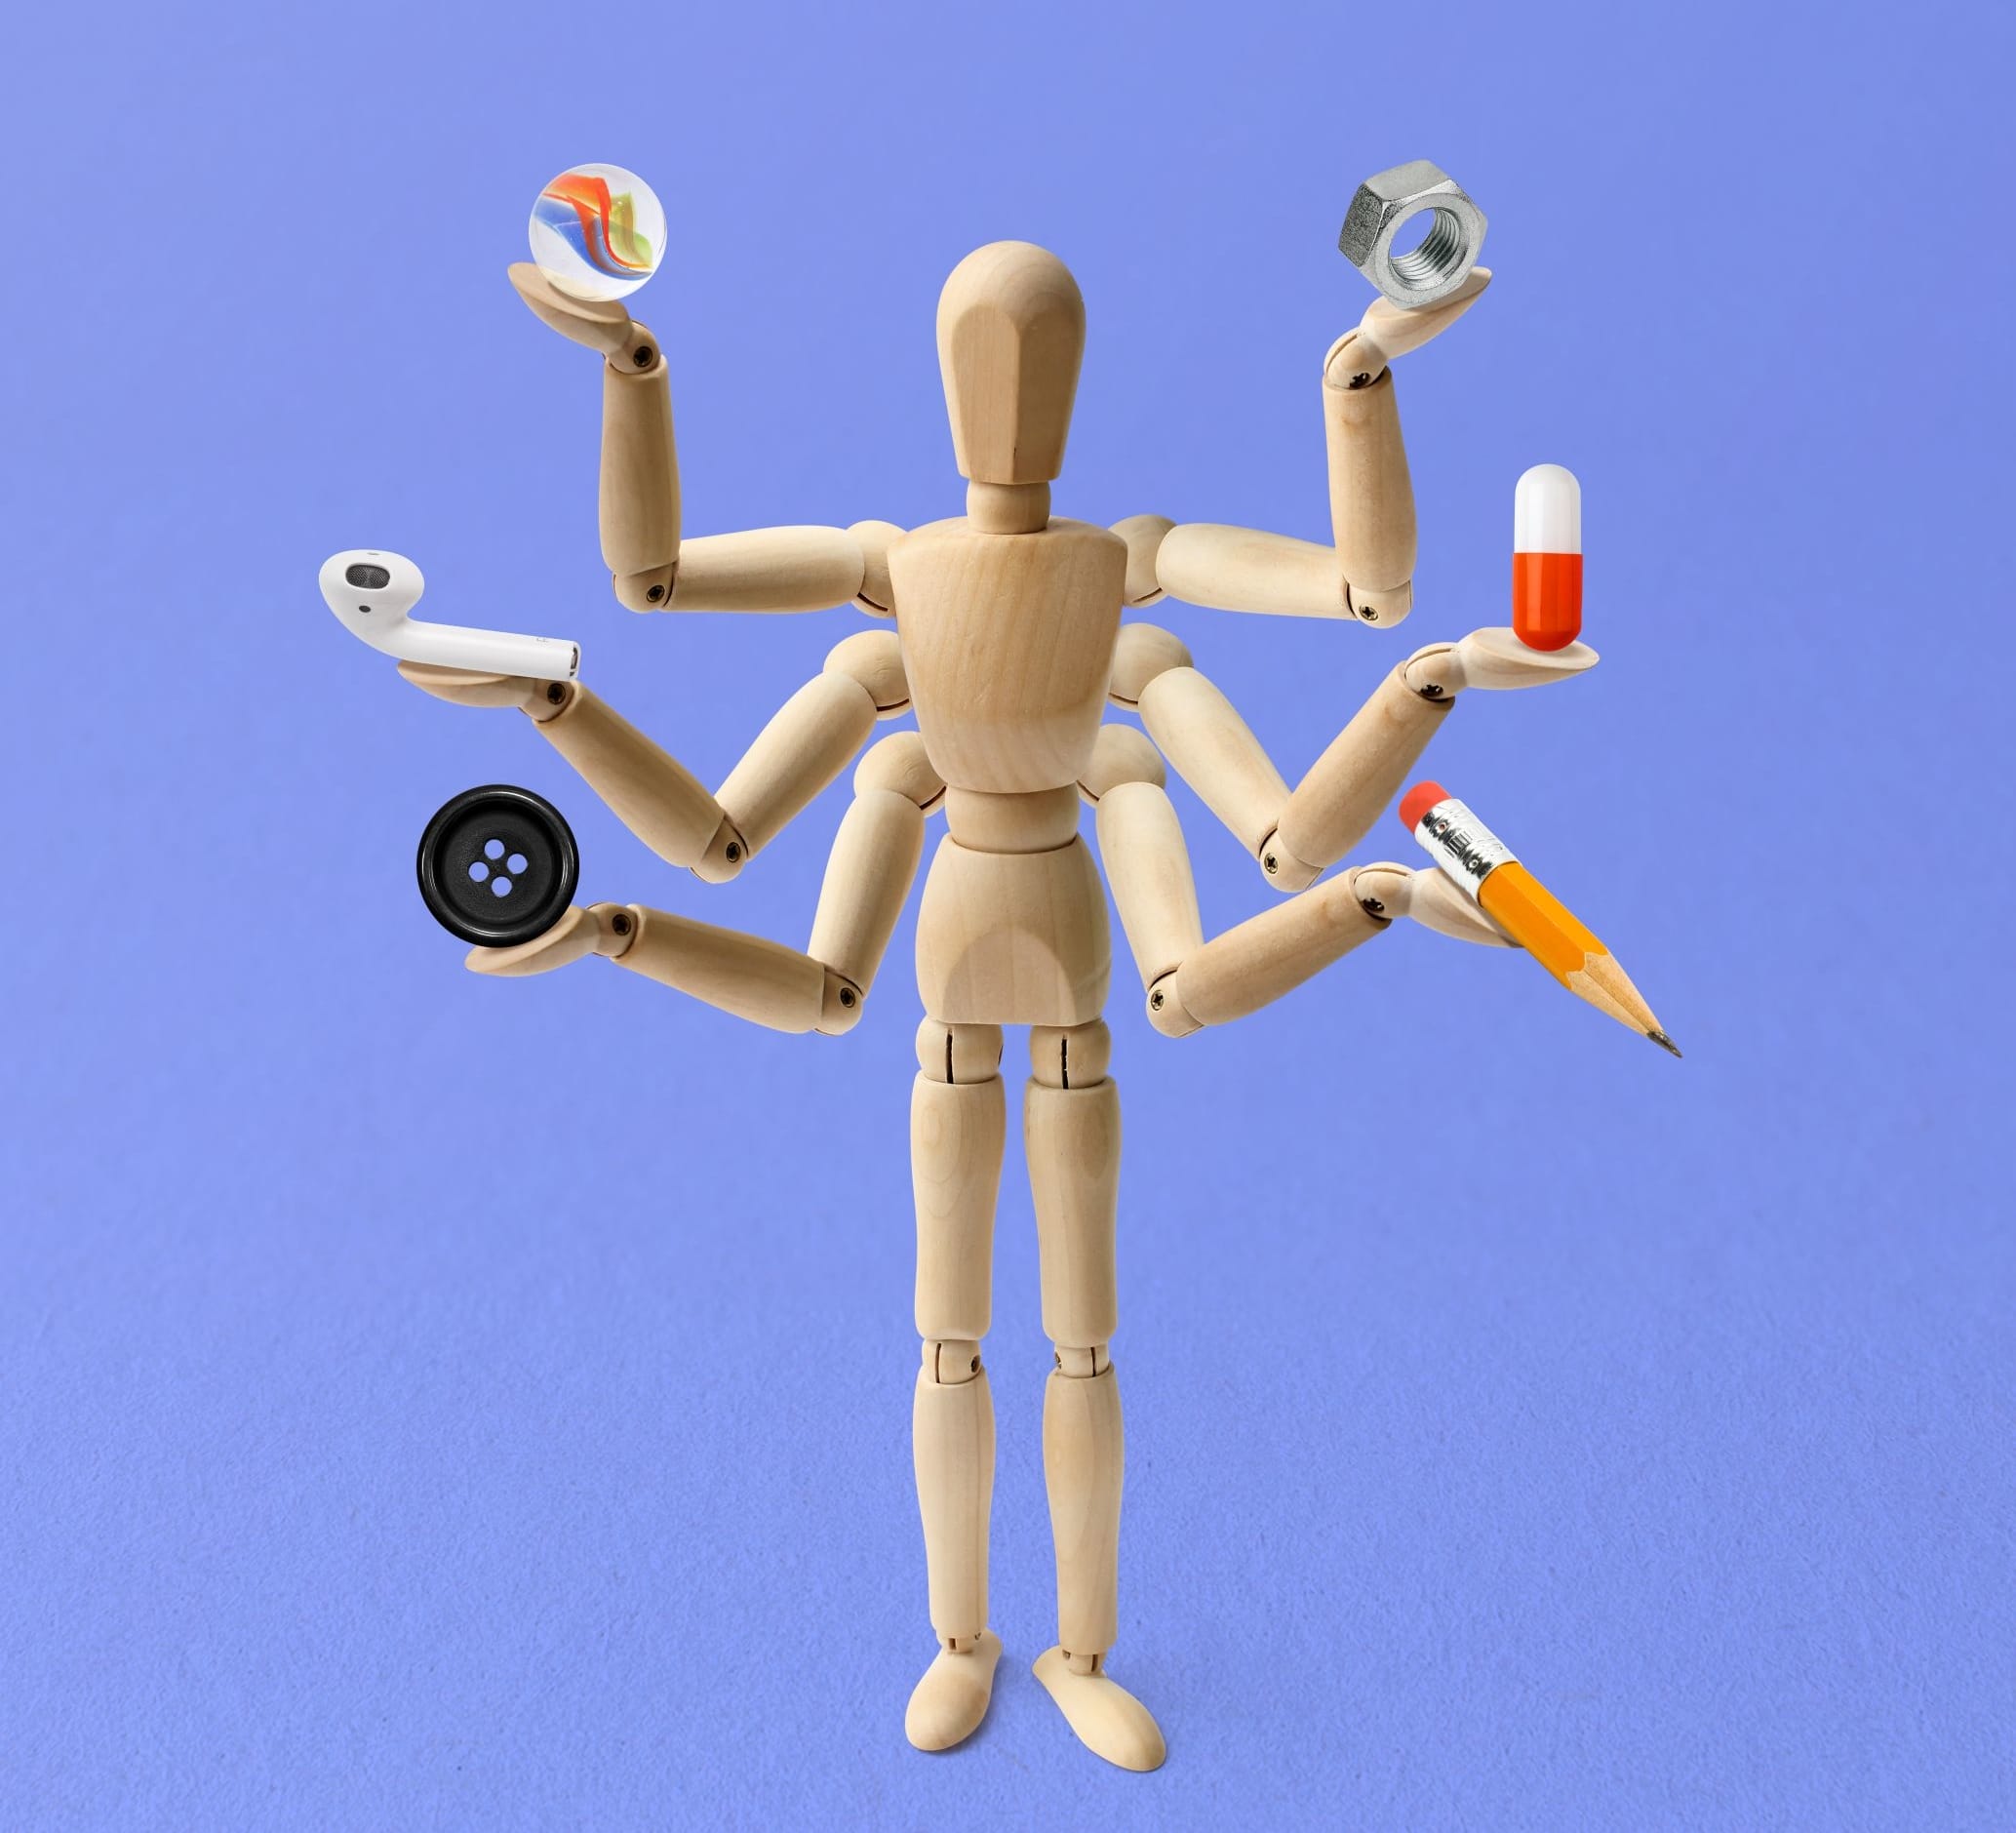 Illustration of a mannequin with six arms holding various objects.